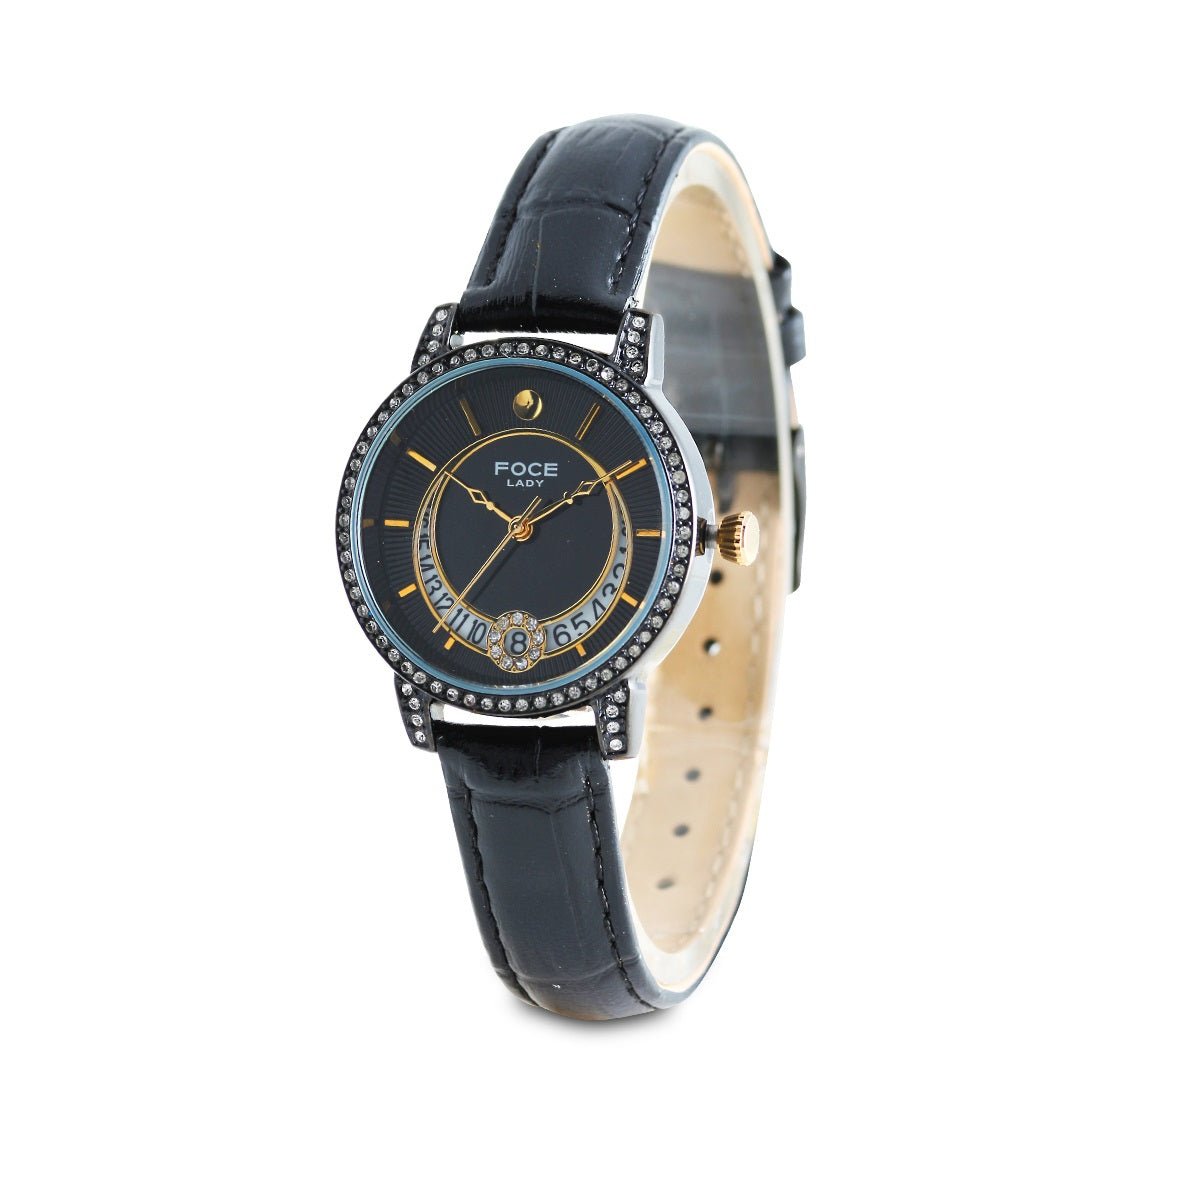 Multifunction Black Dial Leather Strap